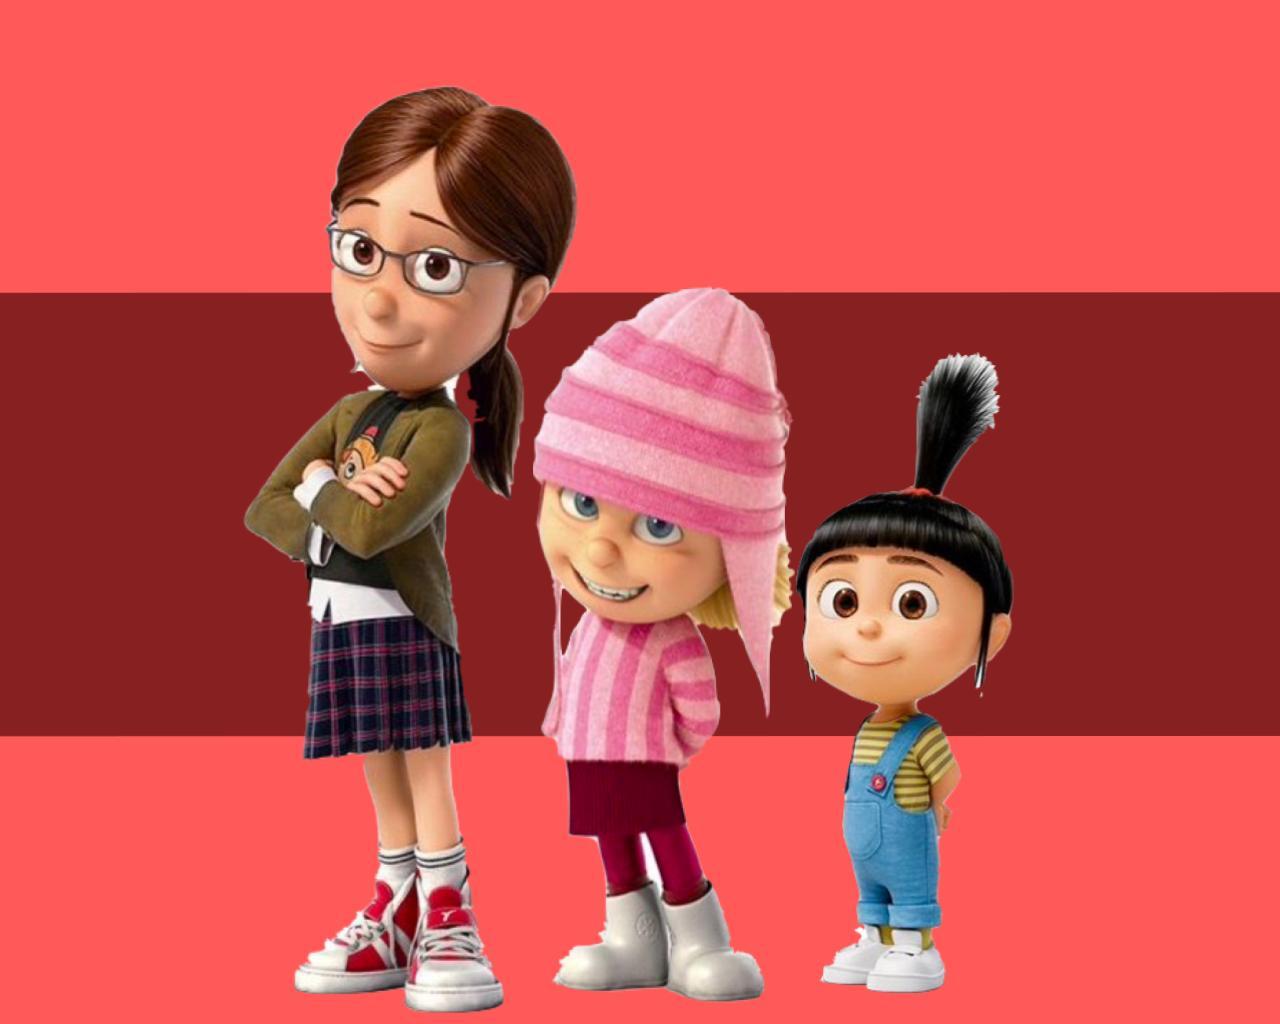 All Your Faves Hate Autism $peaks! Margo, Edith, and Agnes from Despicable Me hate...